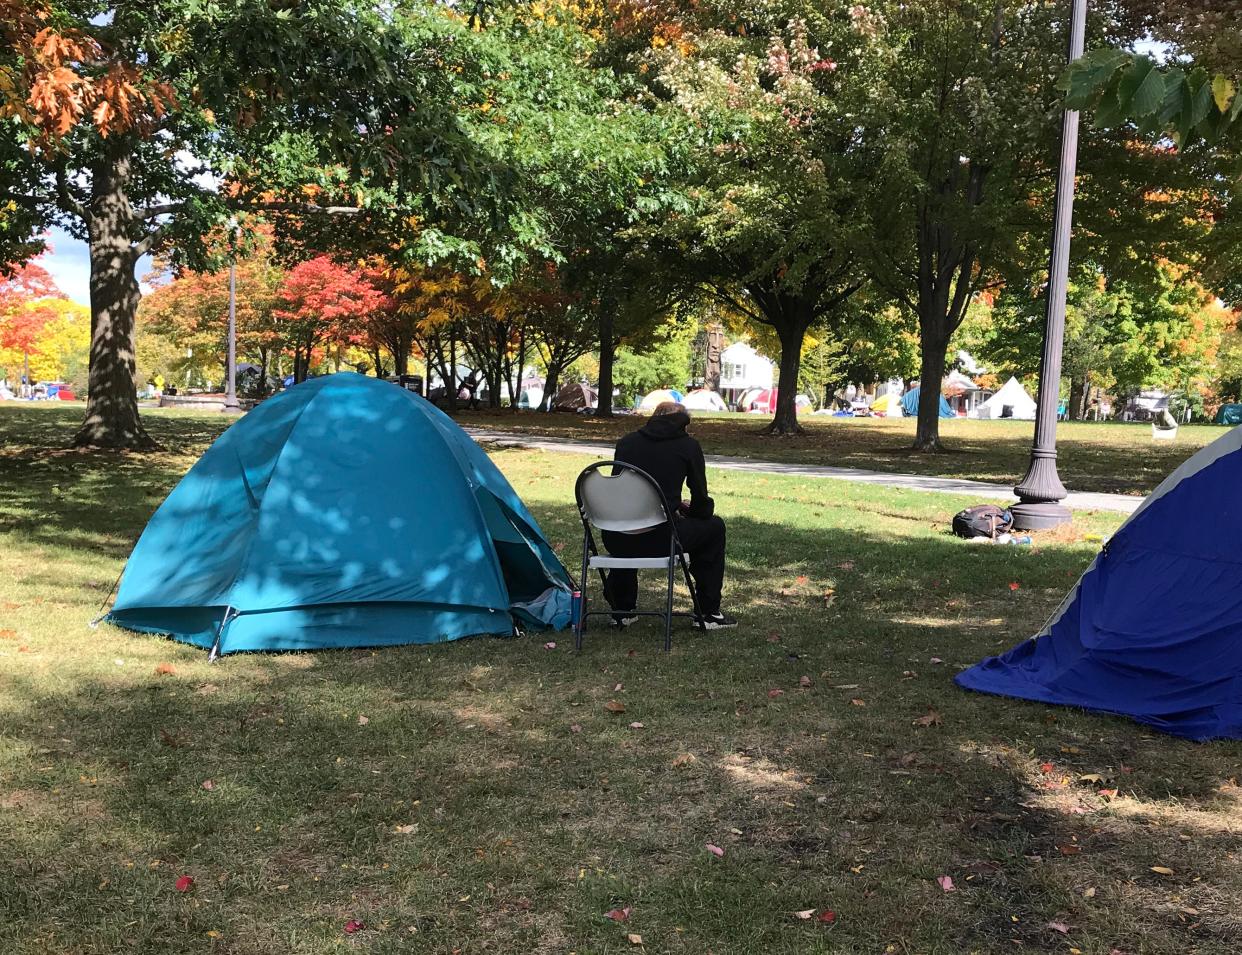 Joe Chambers, 47, sits next to his tent at Battery Park in Burlington on Oct. 1, 2020.
Chambers says he is homeless, and has no idea of where he'll go next after camping at a weeks-long demonstration here in support of racial justice.